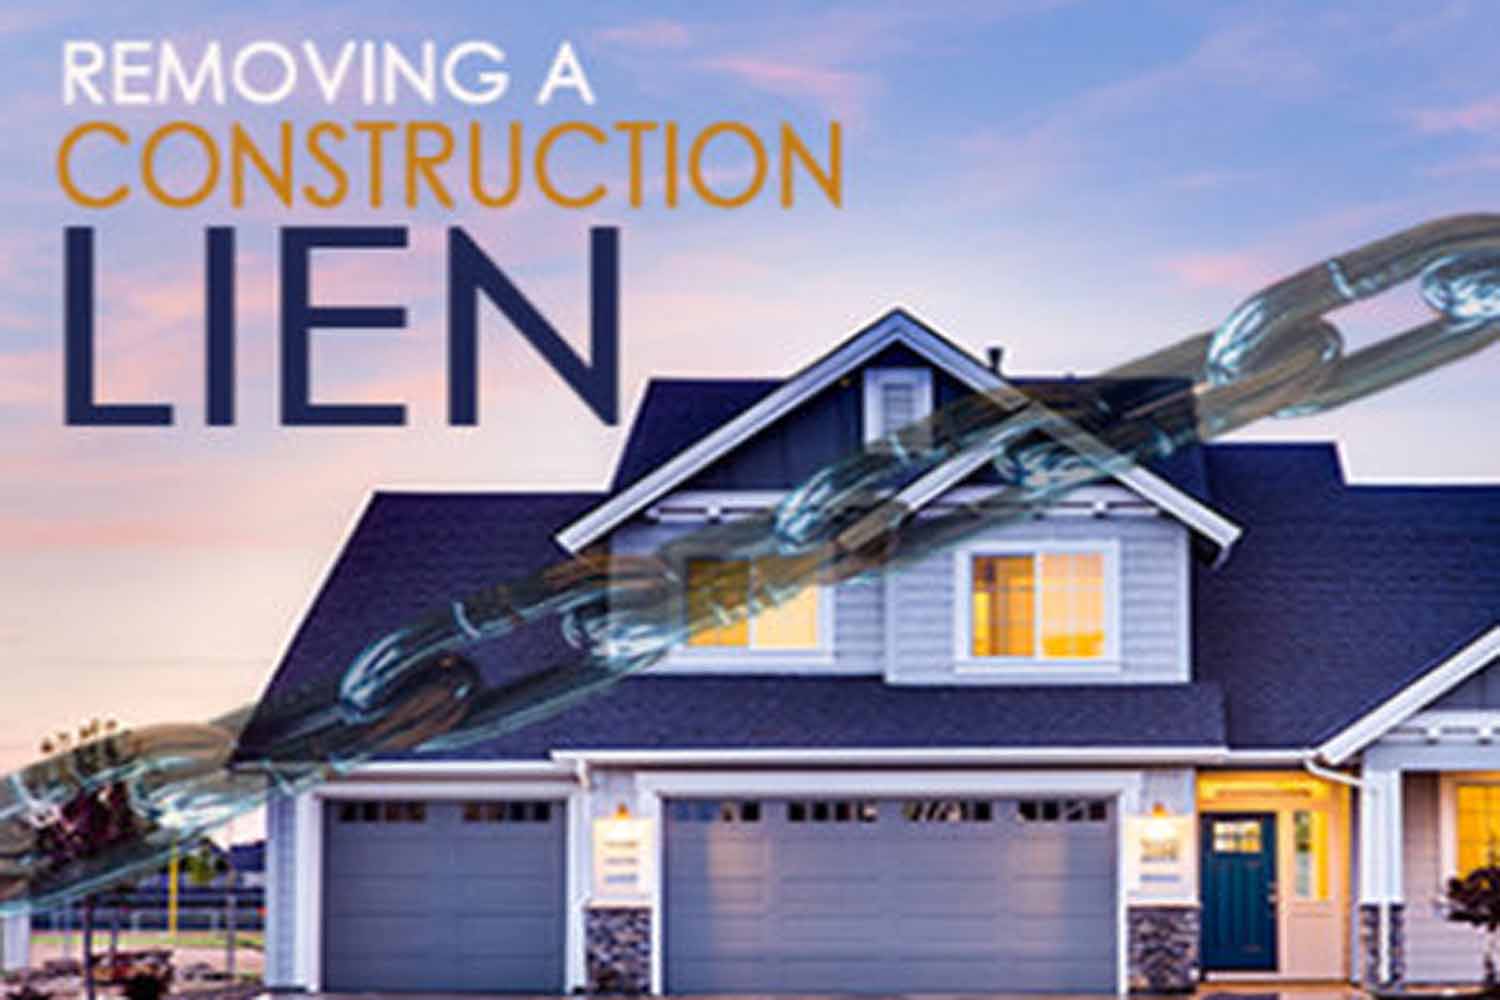 Florida Lien Law: Removing a Construction Lien From Your Property